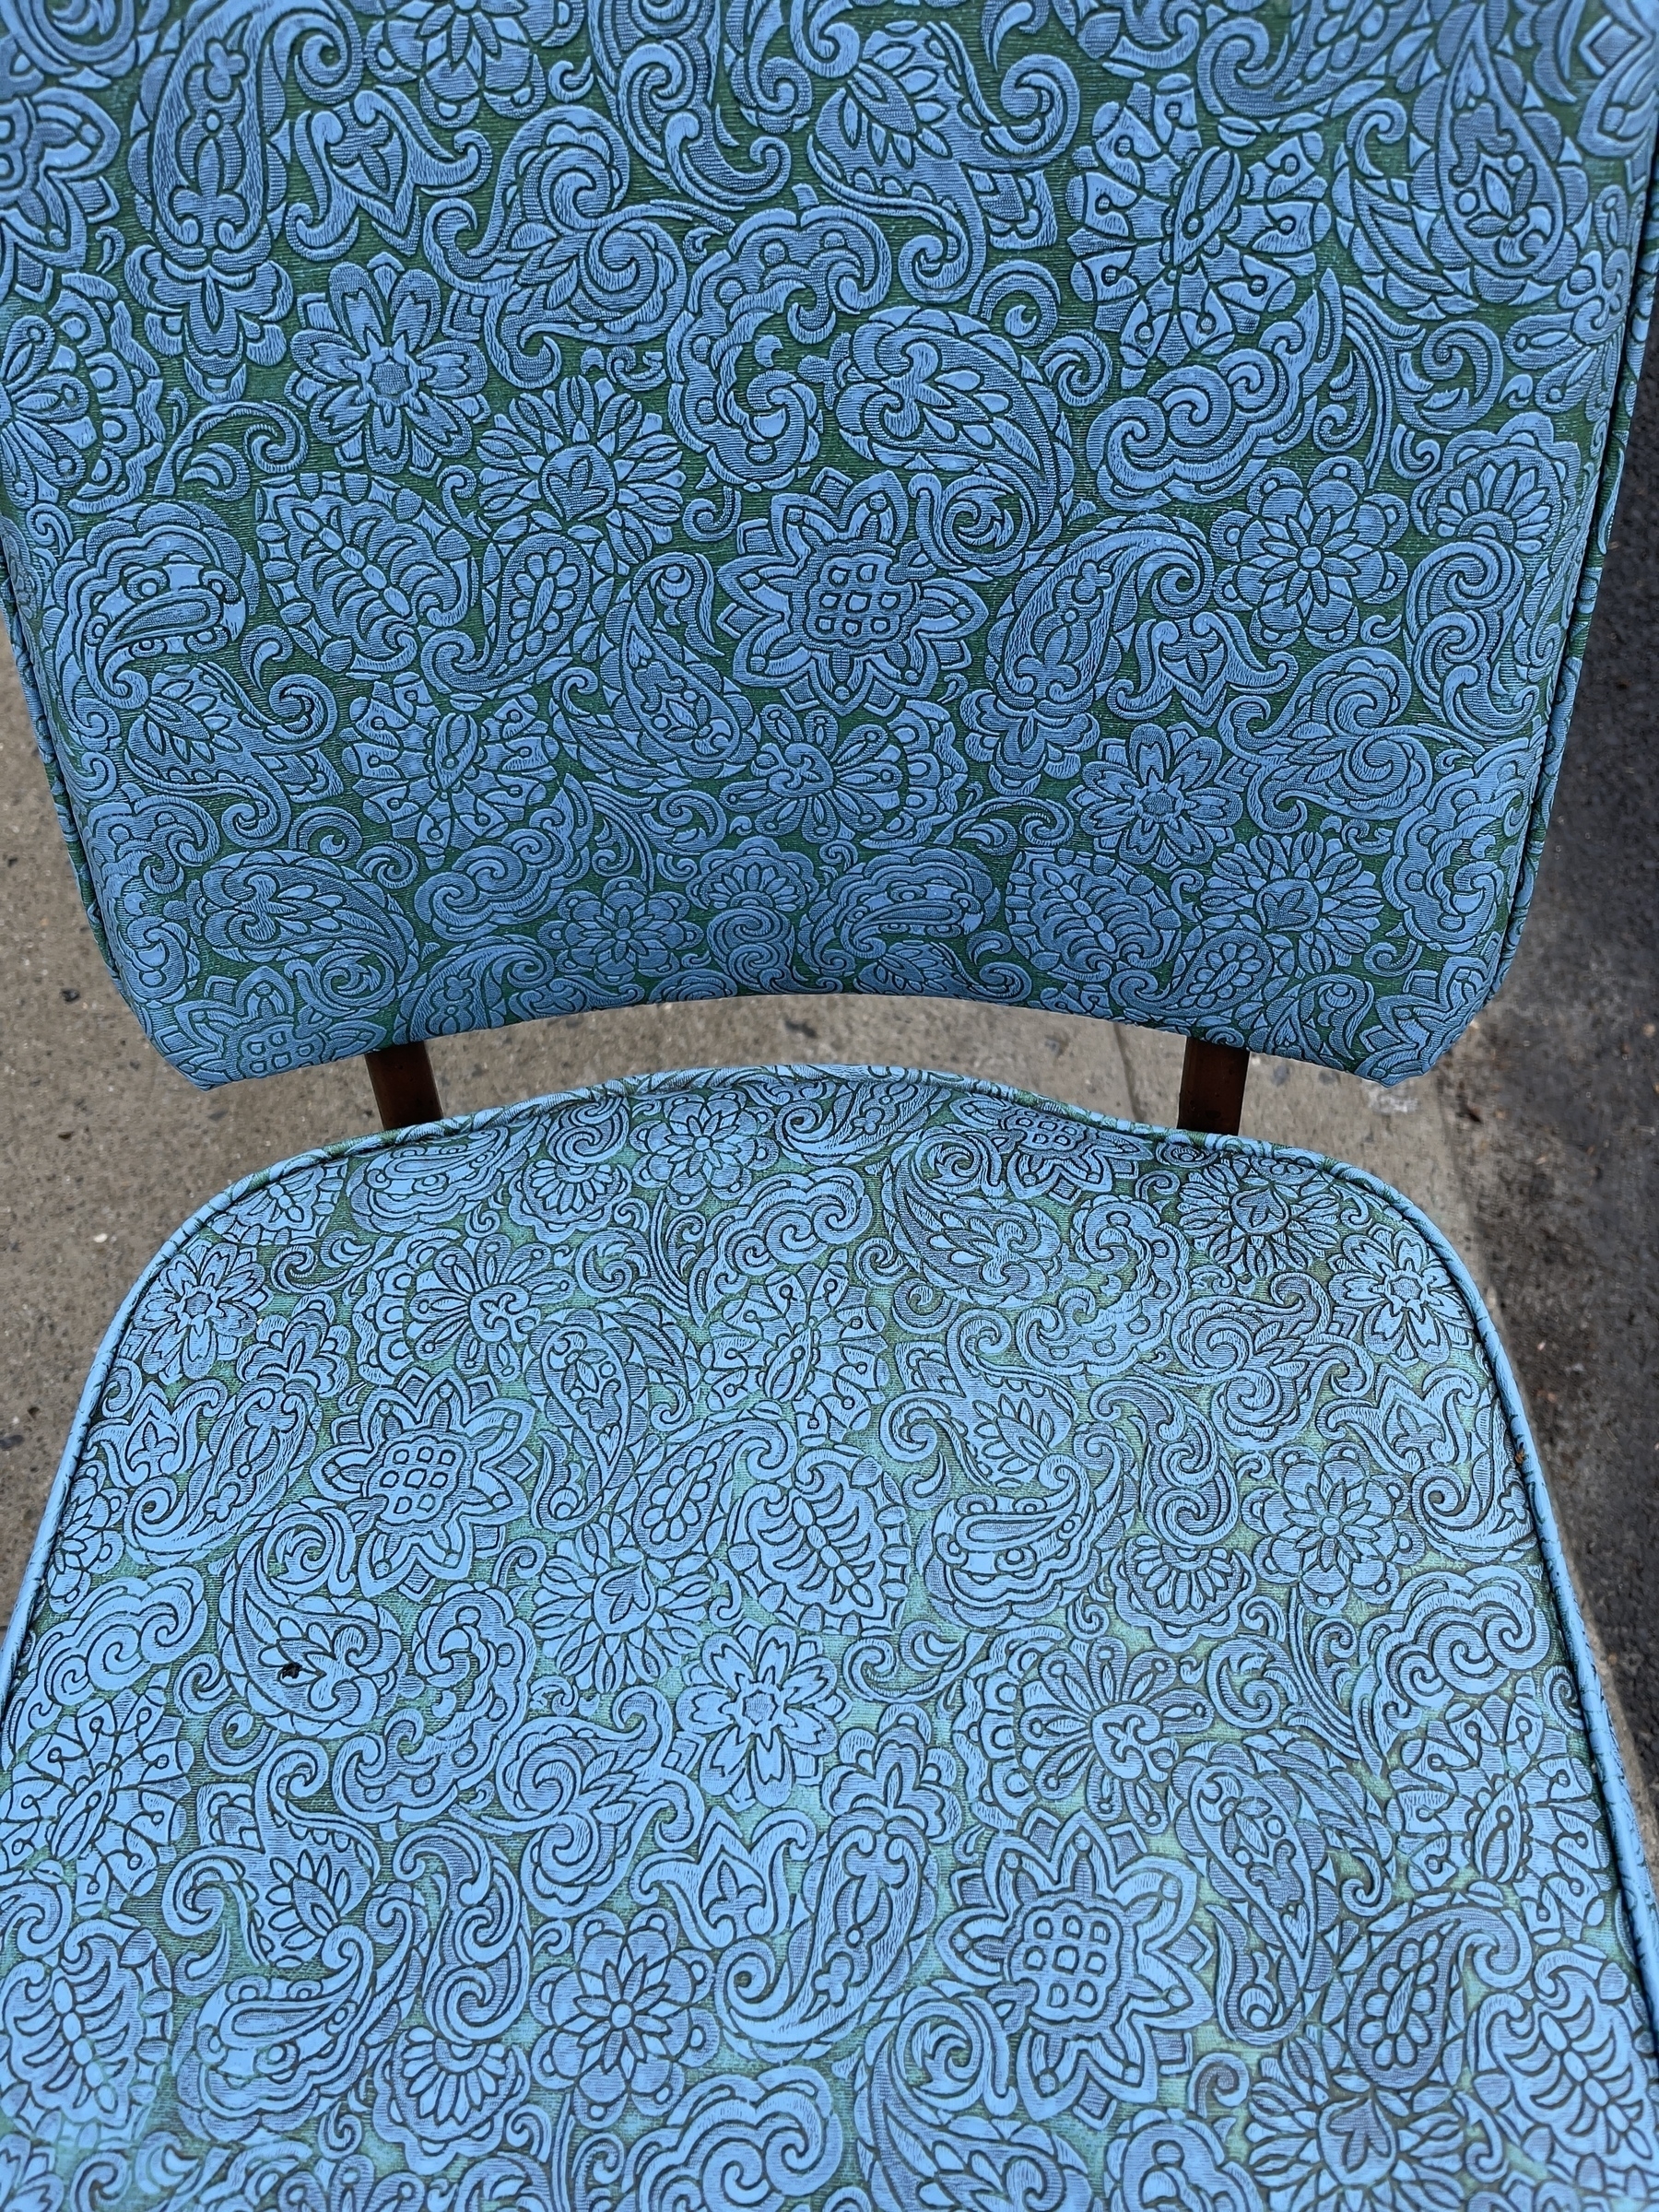 Blue vinyl plastic chair seat cushions with embossed paisley design.